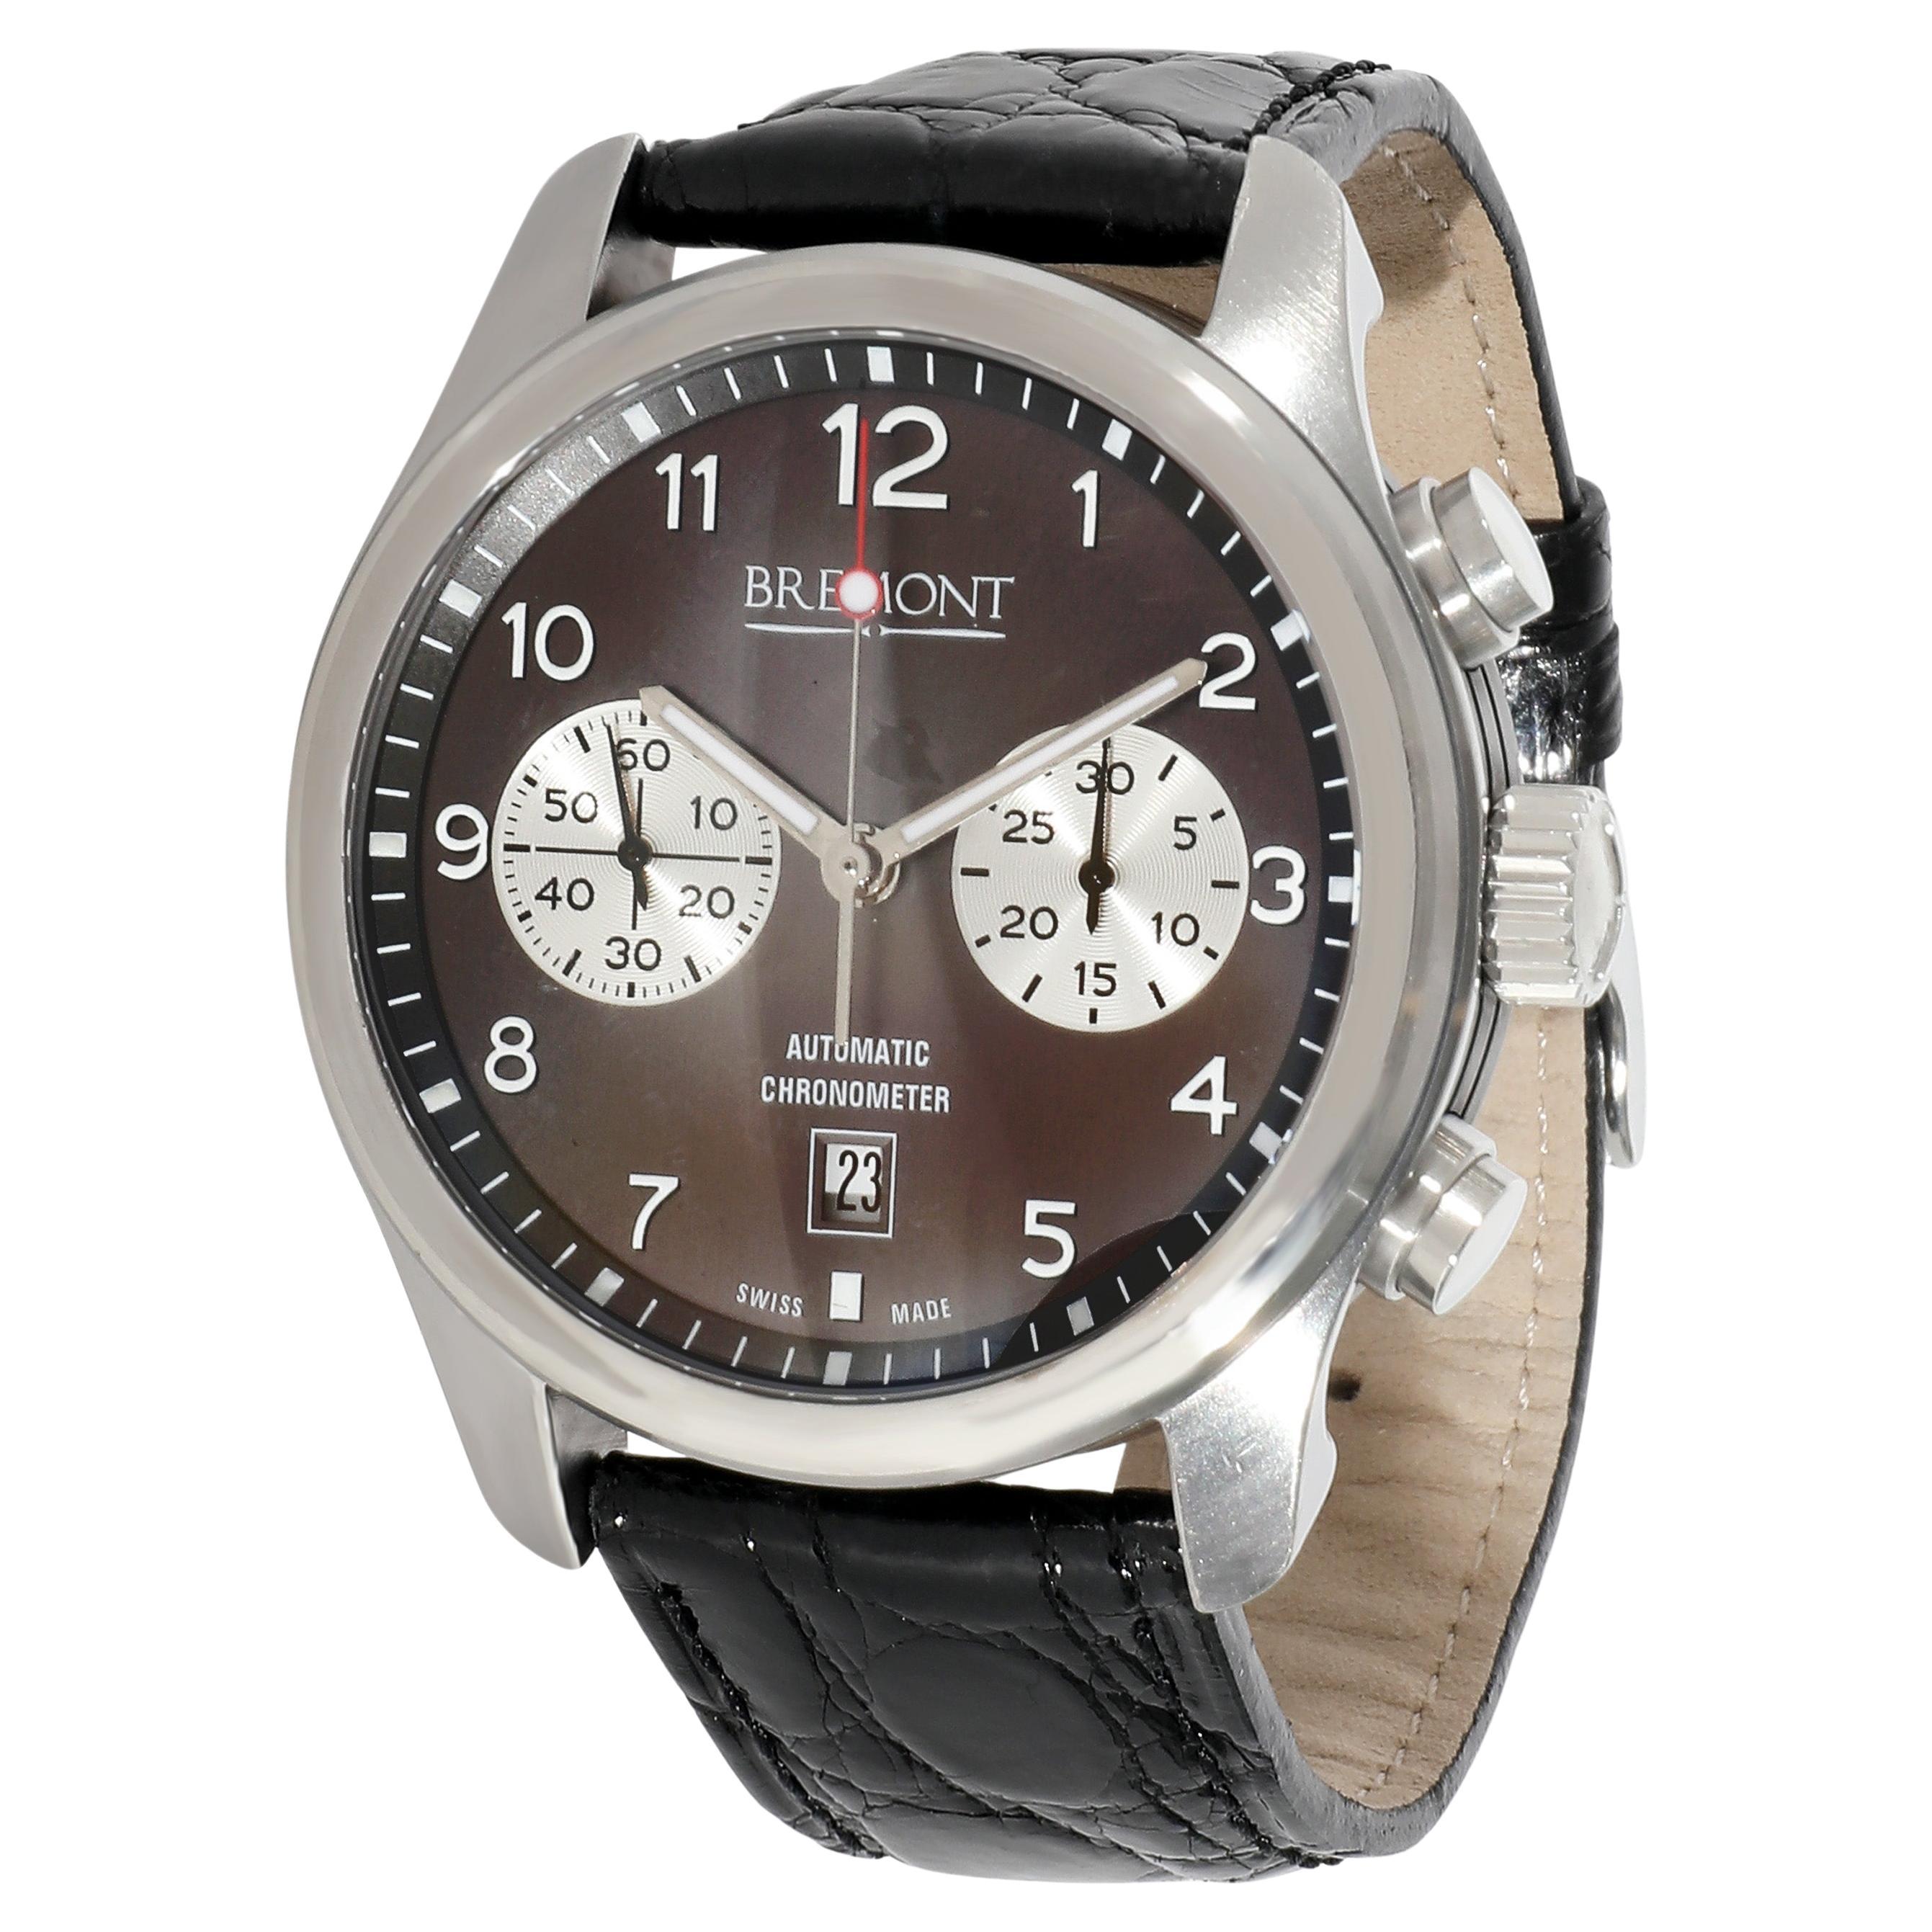 Are Bremont watches Swiss-made?